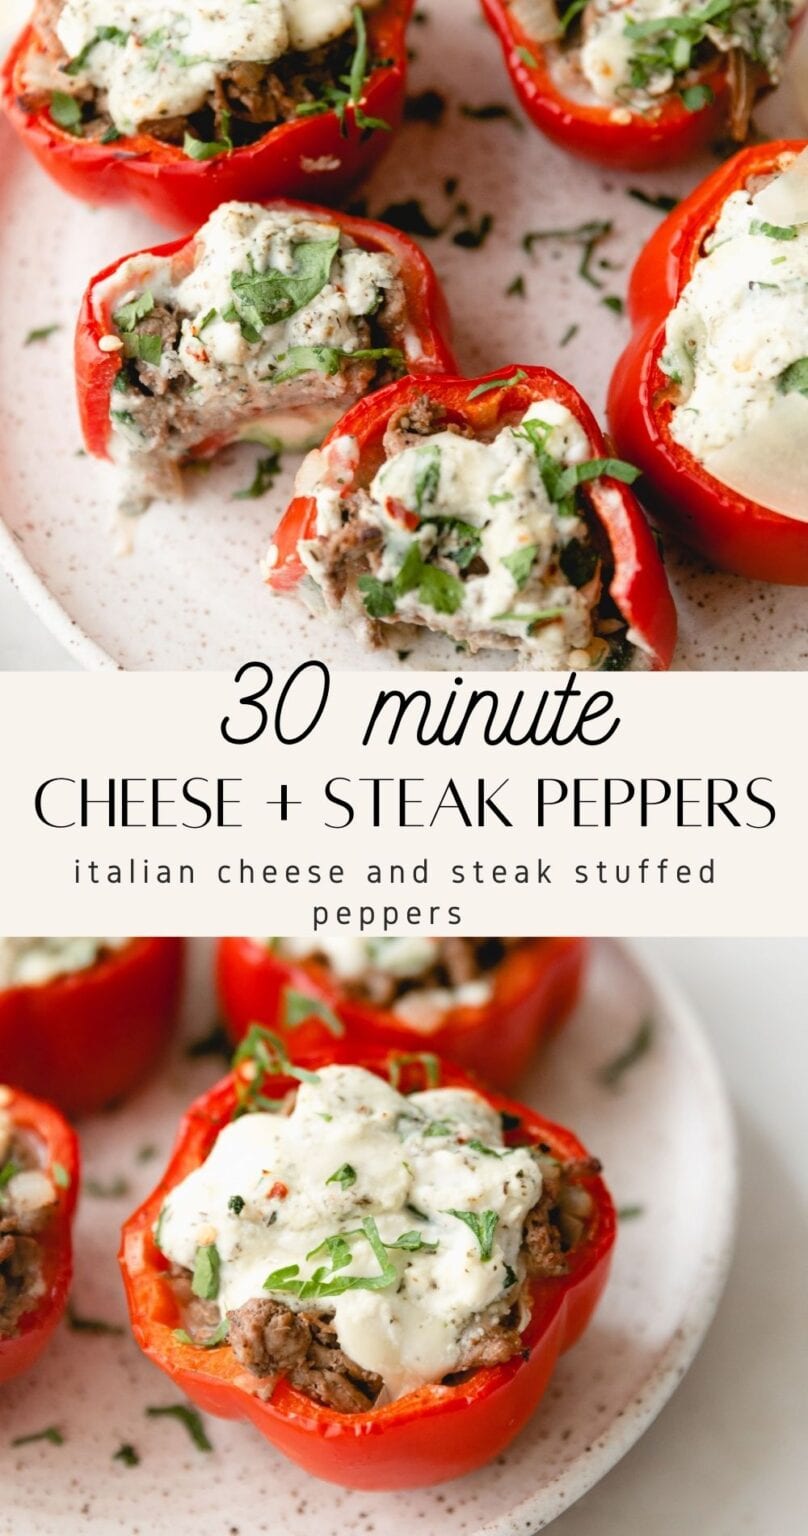 Cheese Stuffed Peppers With Steak - 30 Minute Meal with Steak!